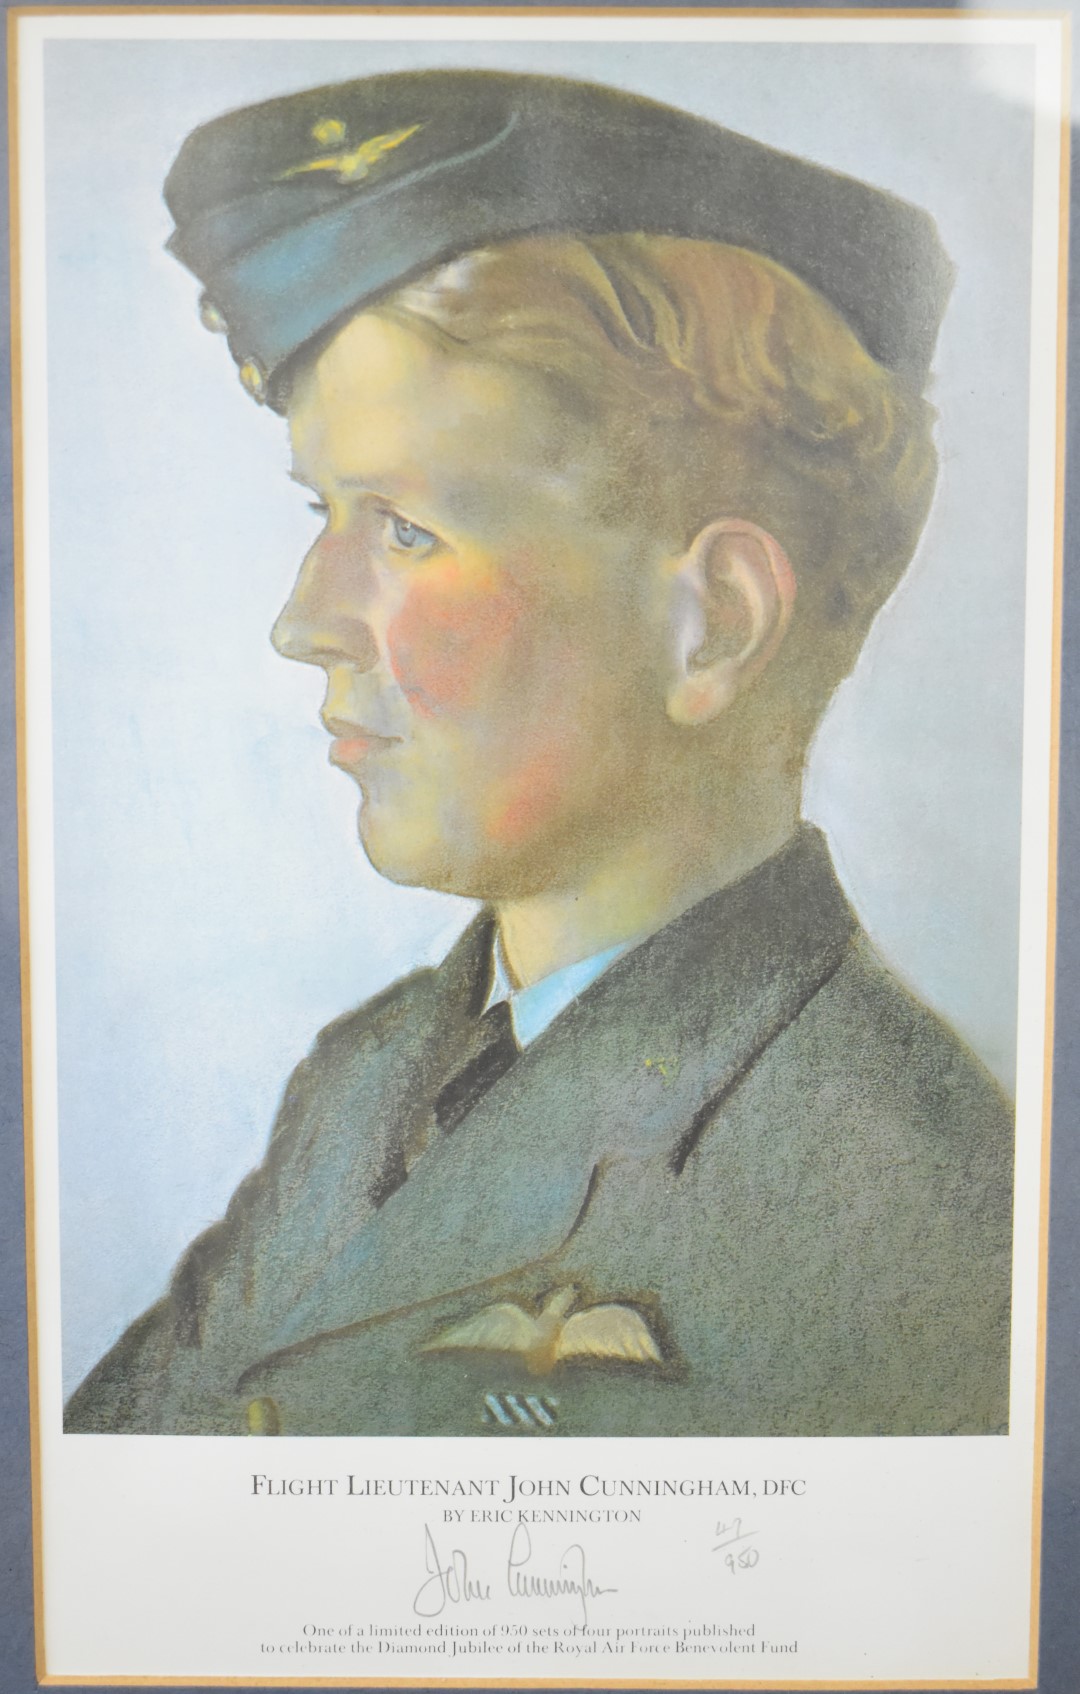 Four limited edition WW2 Royal Air Force portraits by Erick Kennington all signed by subjects, - Image 3 of 10